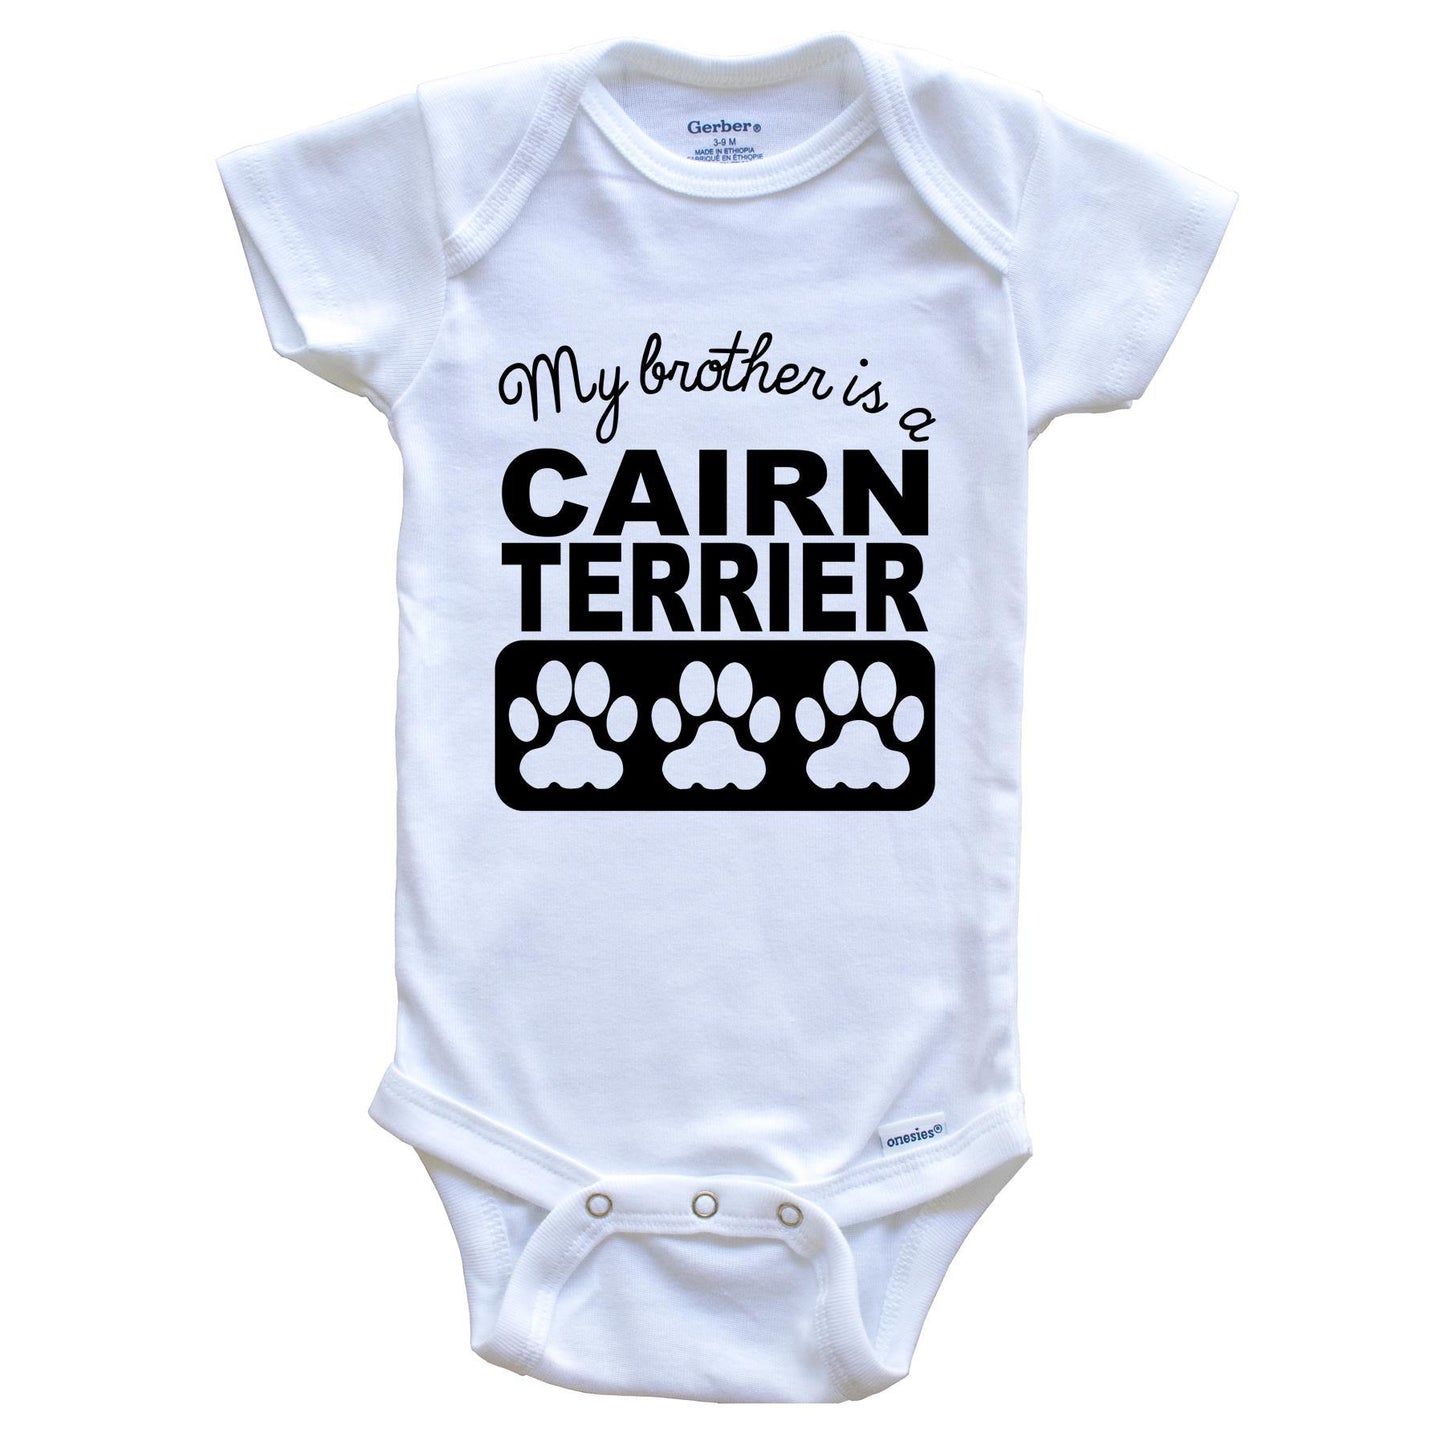 My Brother Is A Cairn Terrier Baby Onesie